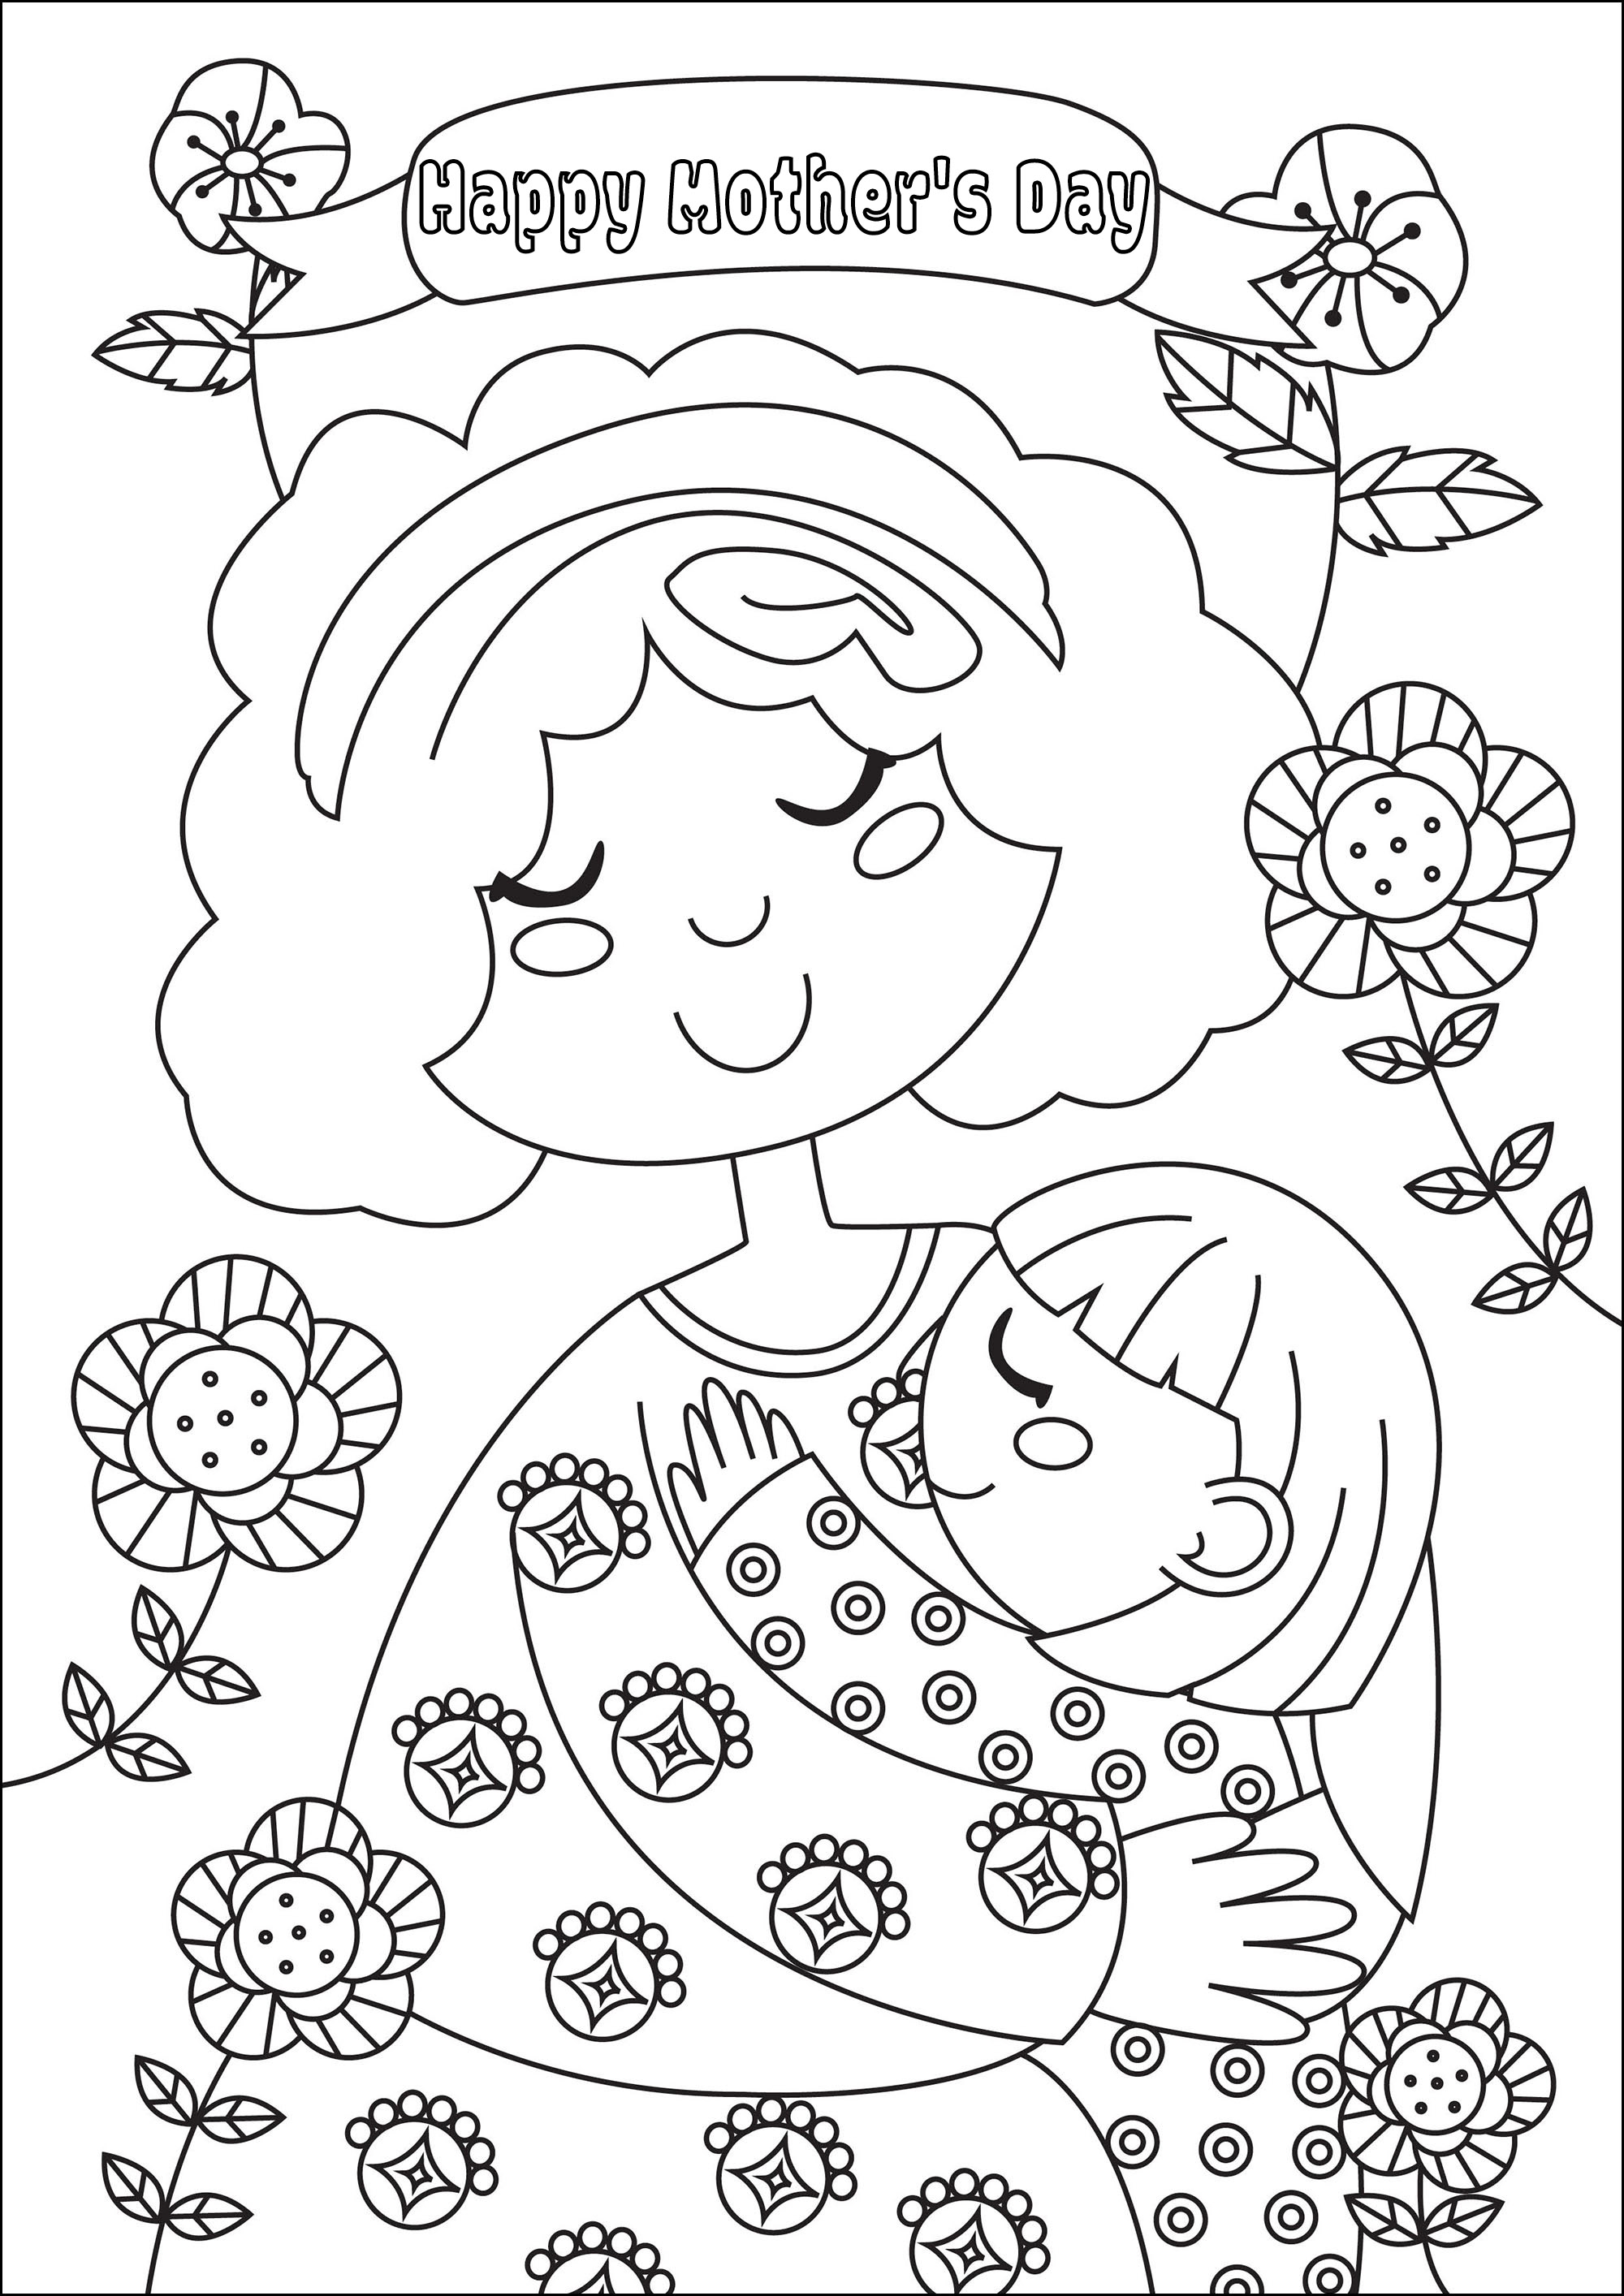 Coloring for Mother's Day. A beautiful coloring page with a little girl kissing her beloved mother, Artist : Gaelle Picard